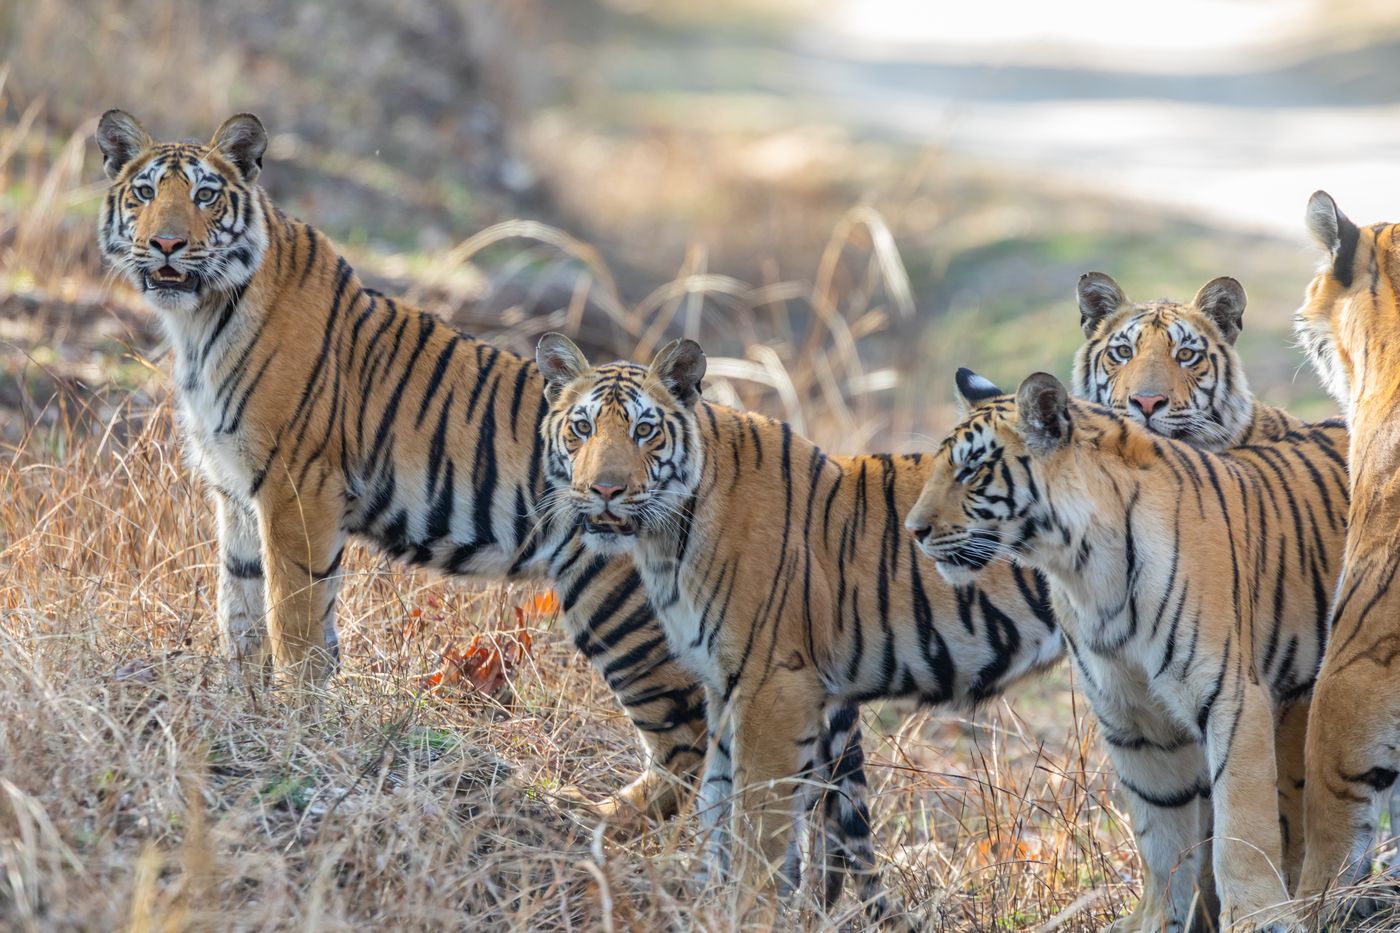 A streak of Bengal tigers in Pench Tiger Reserve.